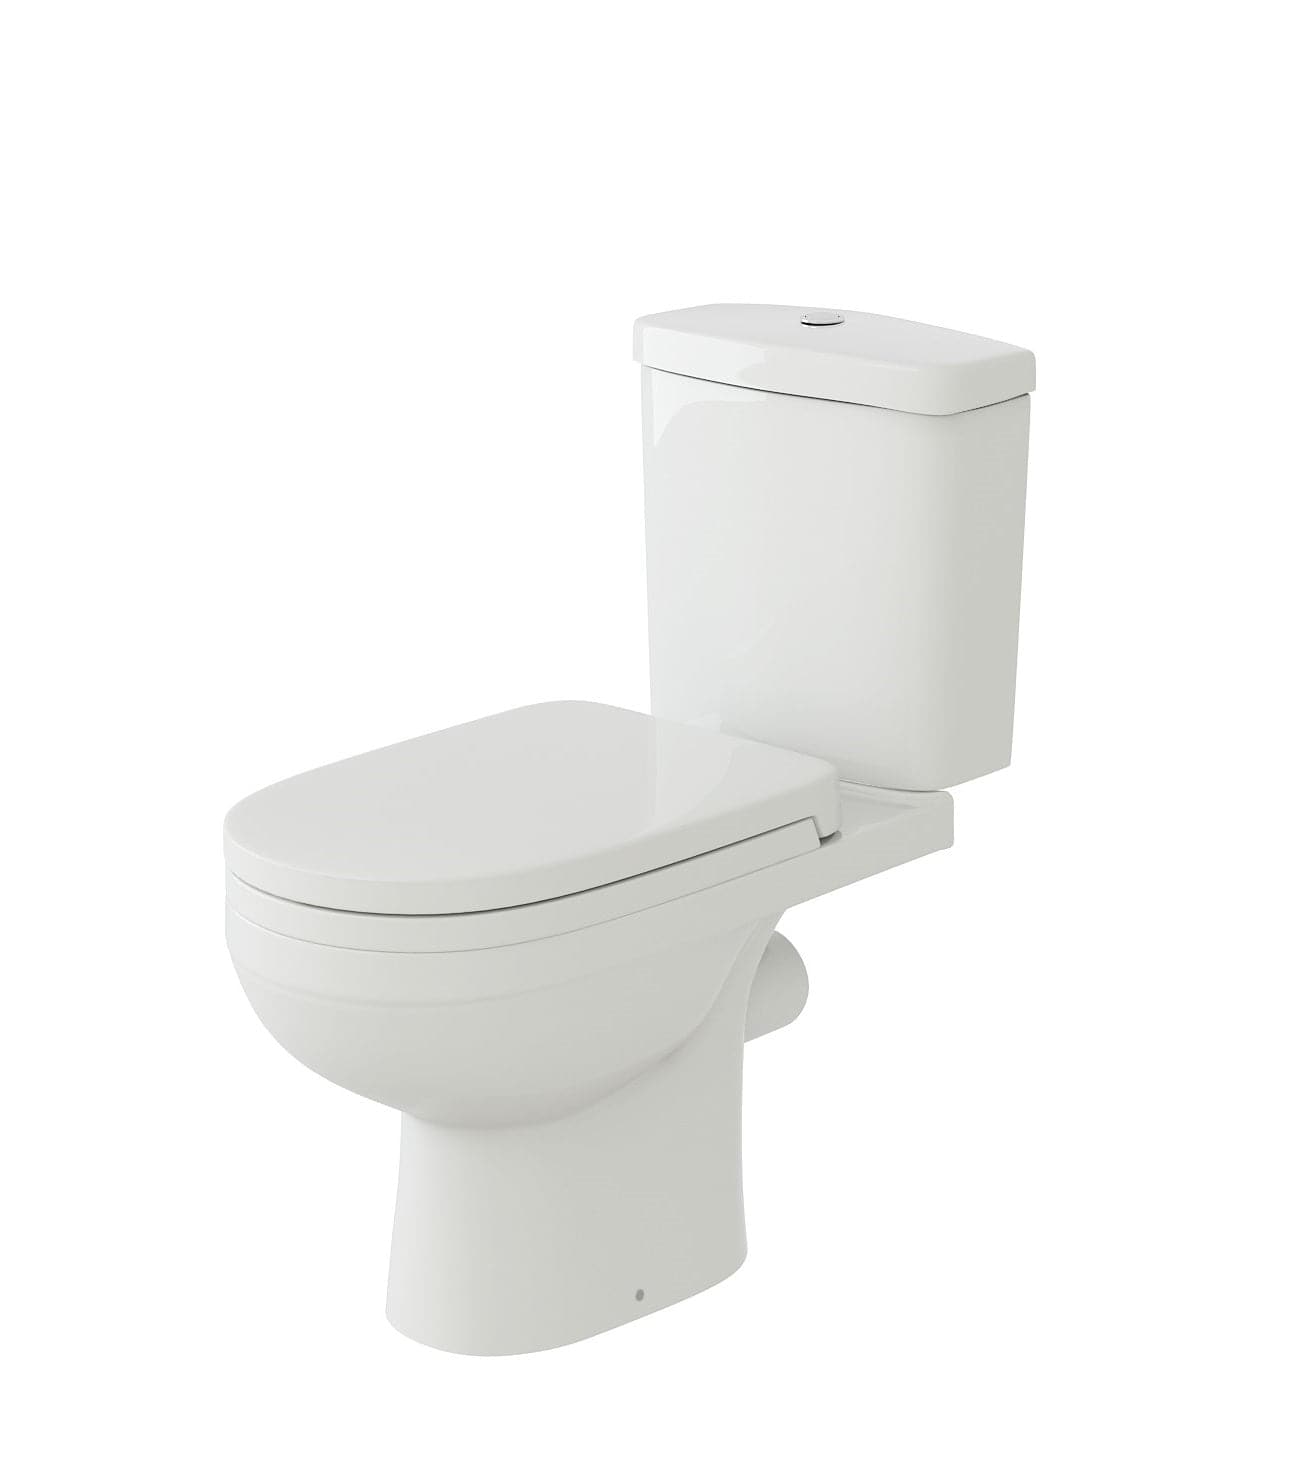 Modern white close coupled toilet with cistern and soft close seat (SLK630). Sleek and space-saving design, perfect for contemporary UK bathrooms. Ideal for small spaces.